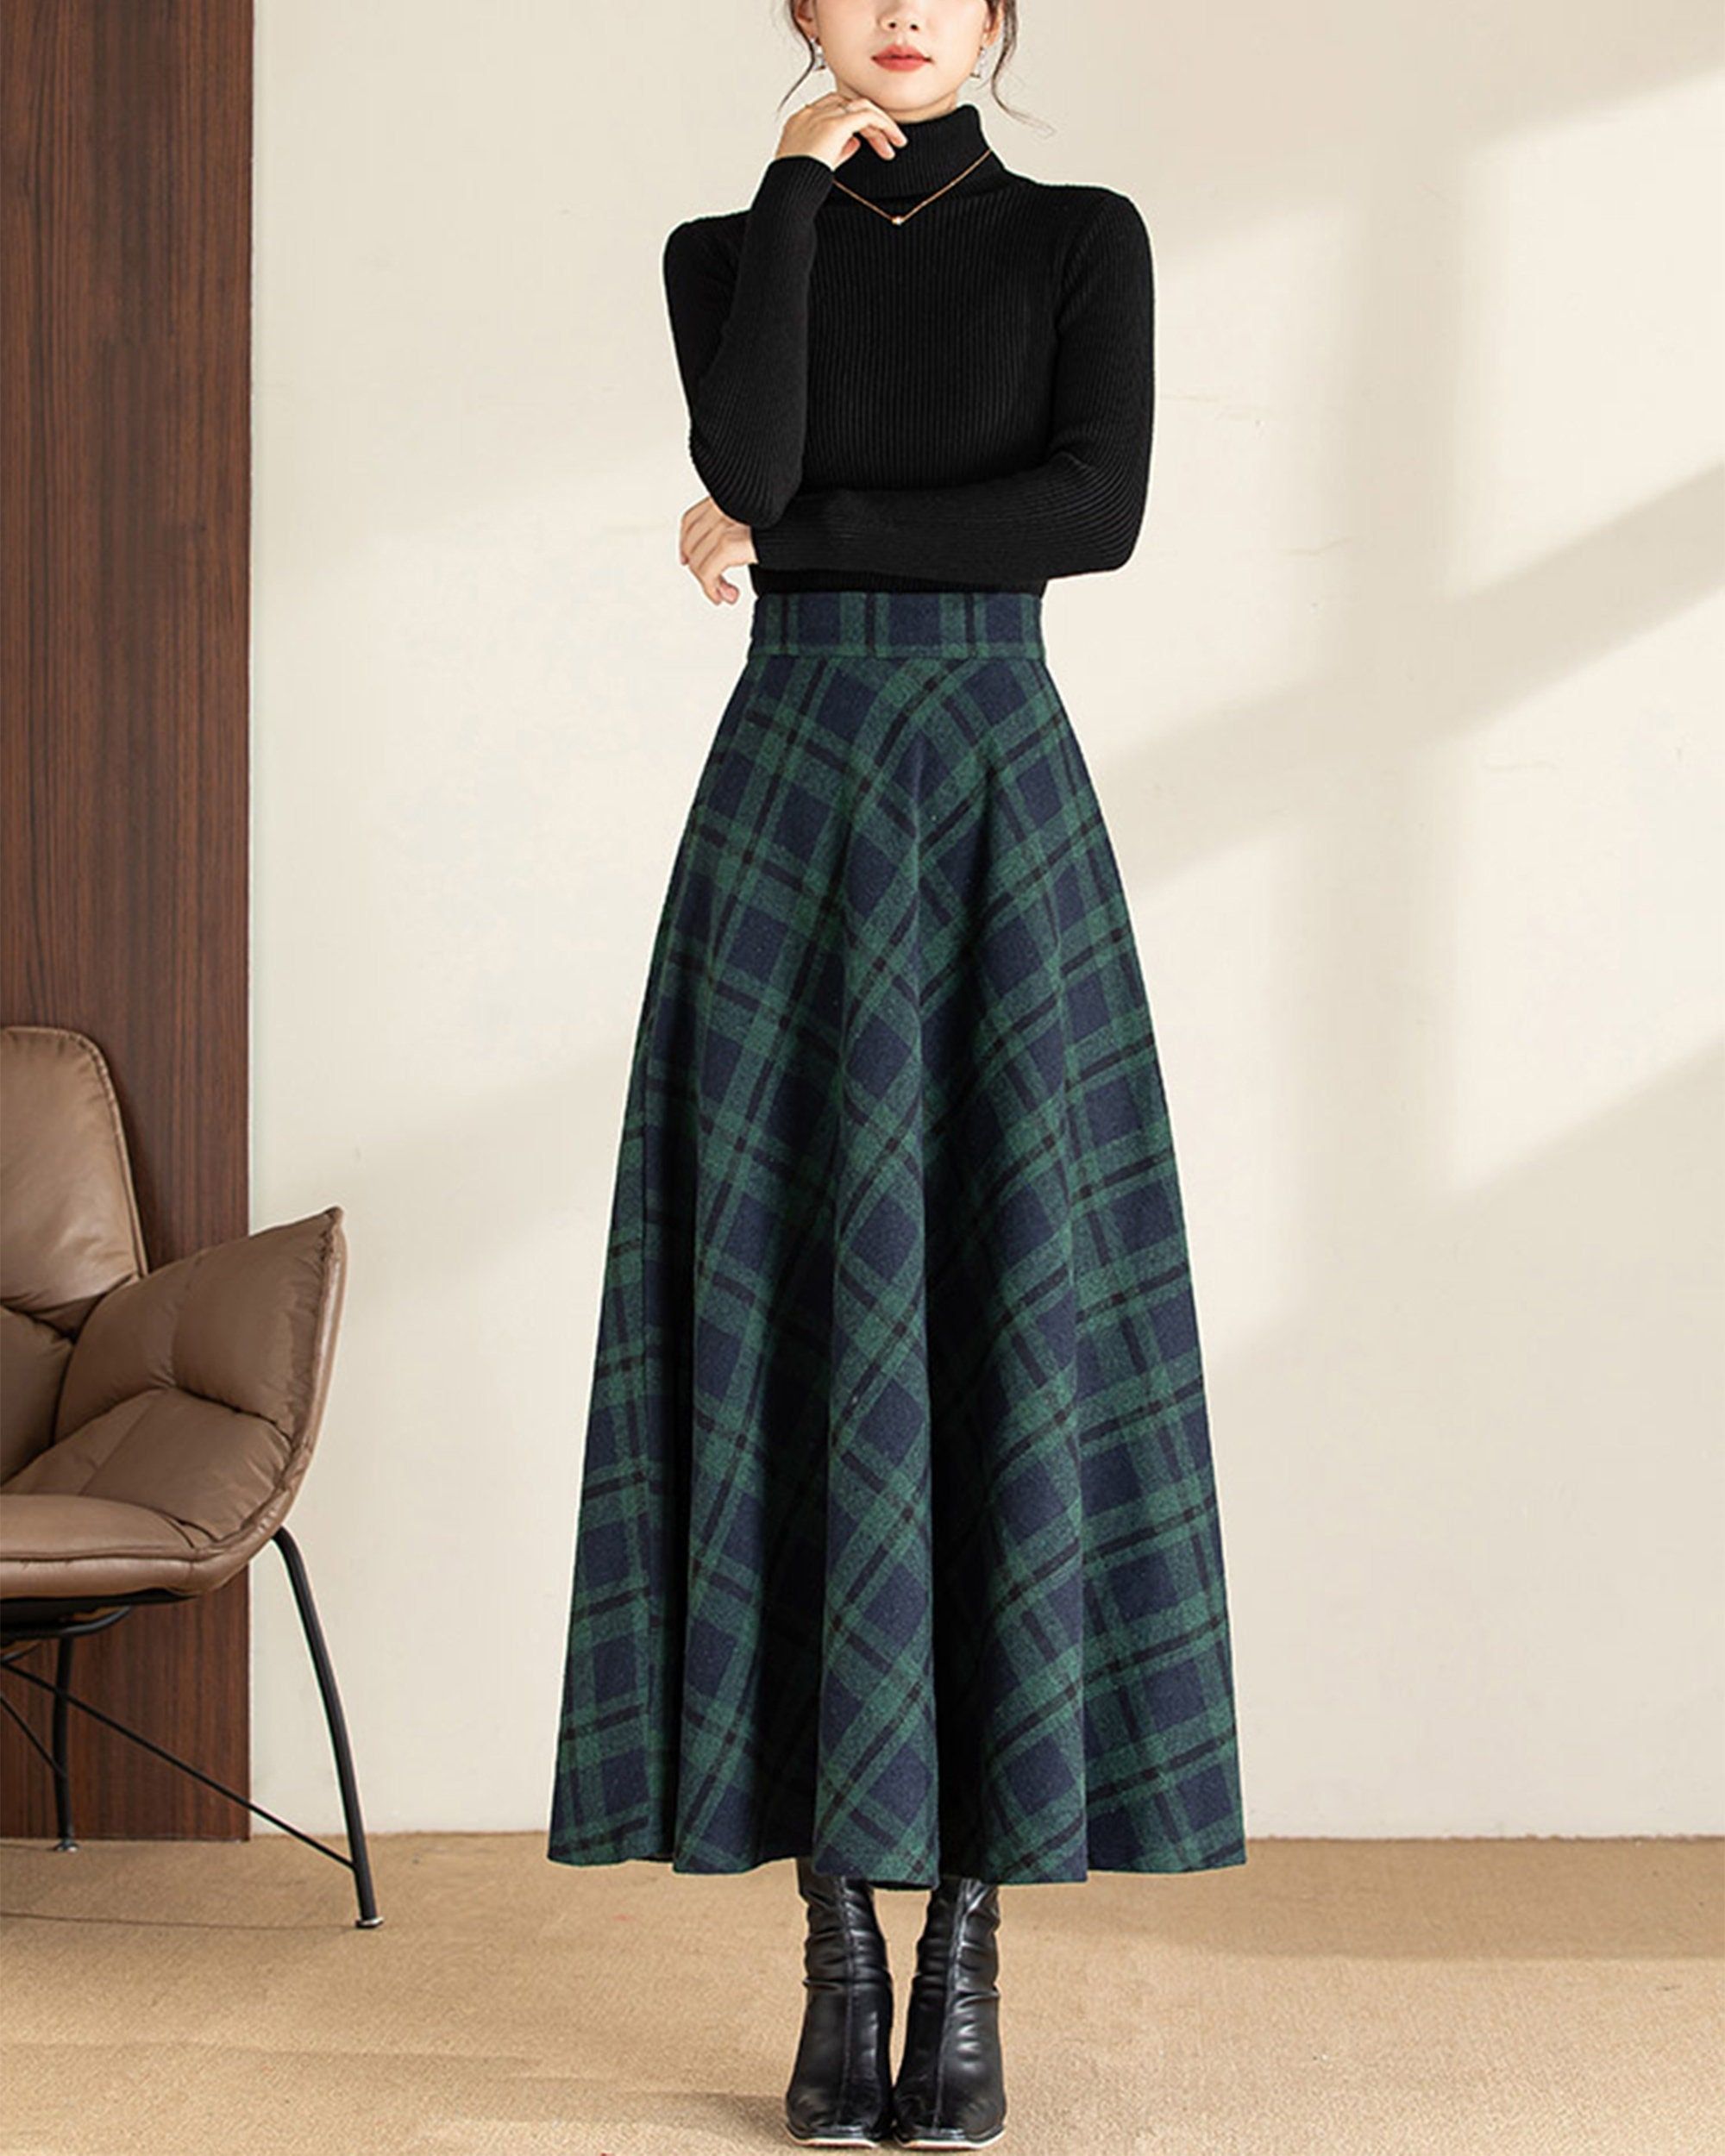 Winter Chic: Stay Warm with Wool Skirts